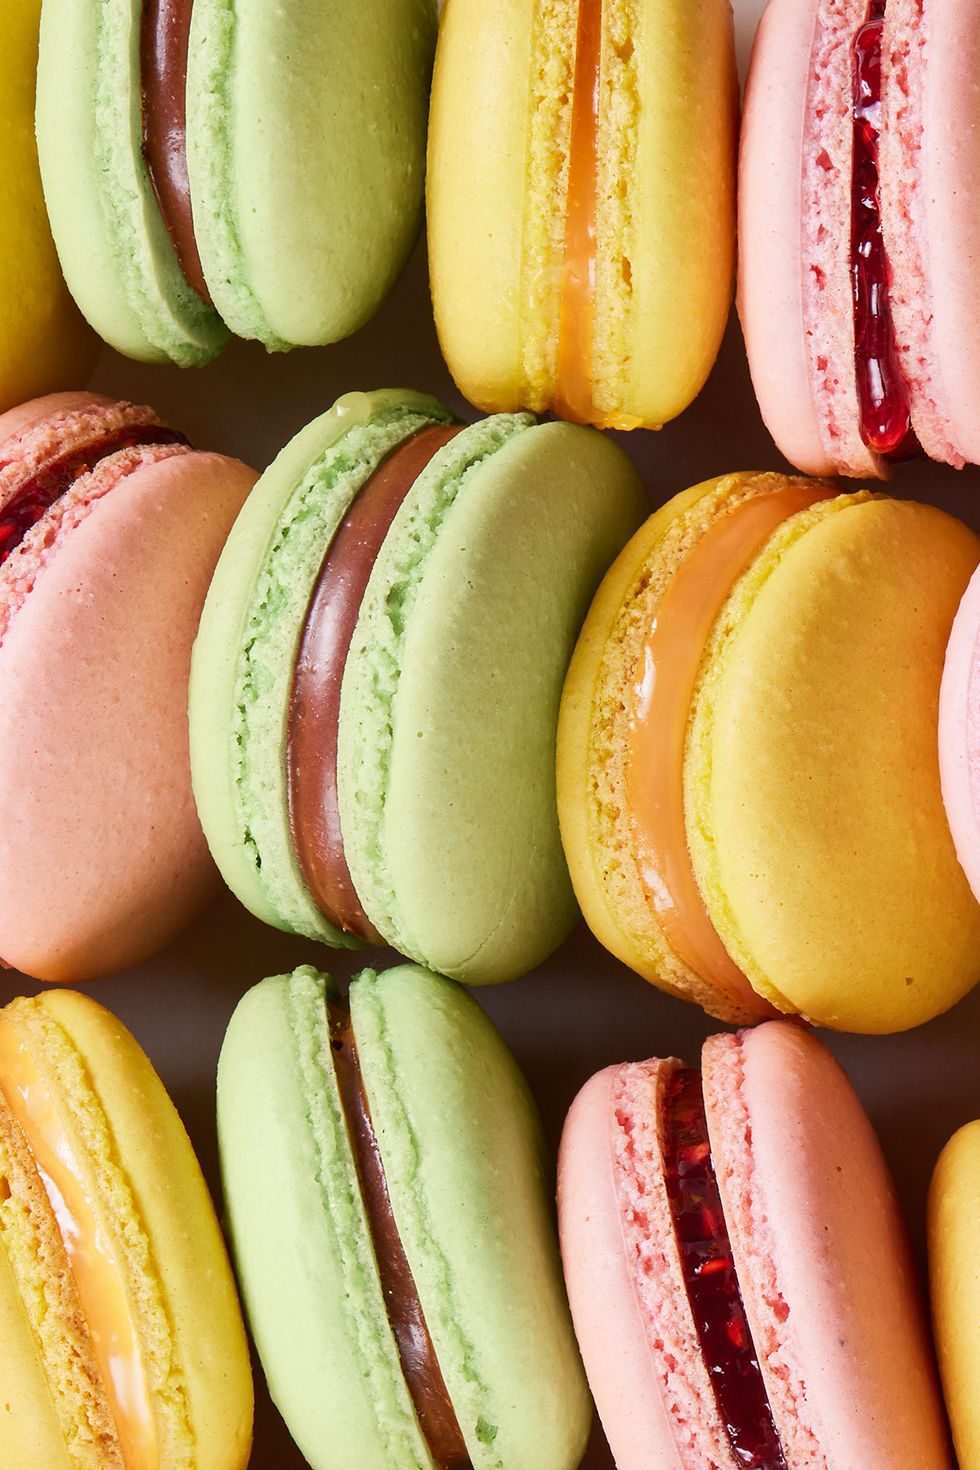 yellow, pink, and green macarons lined up together